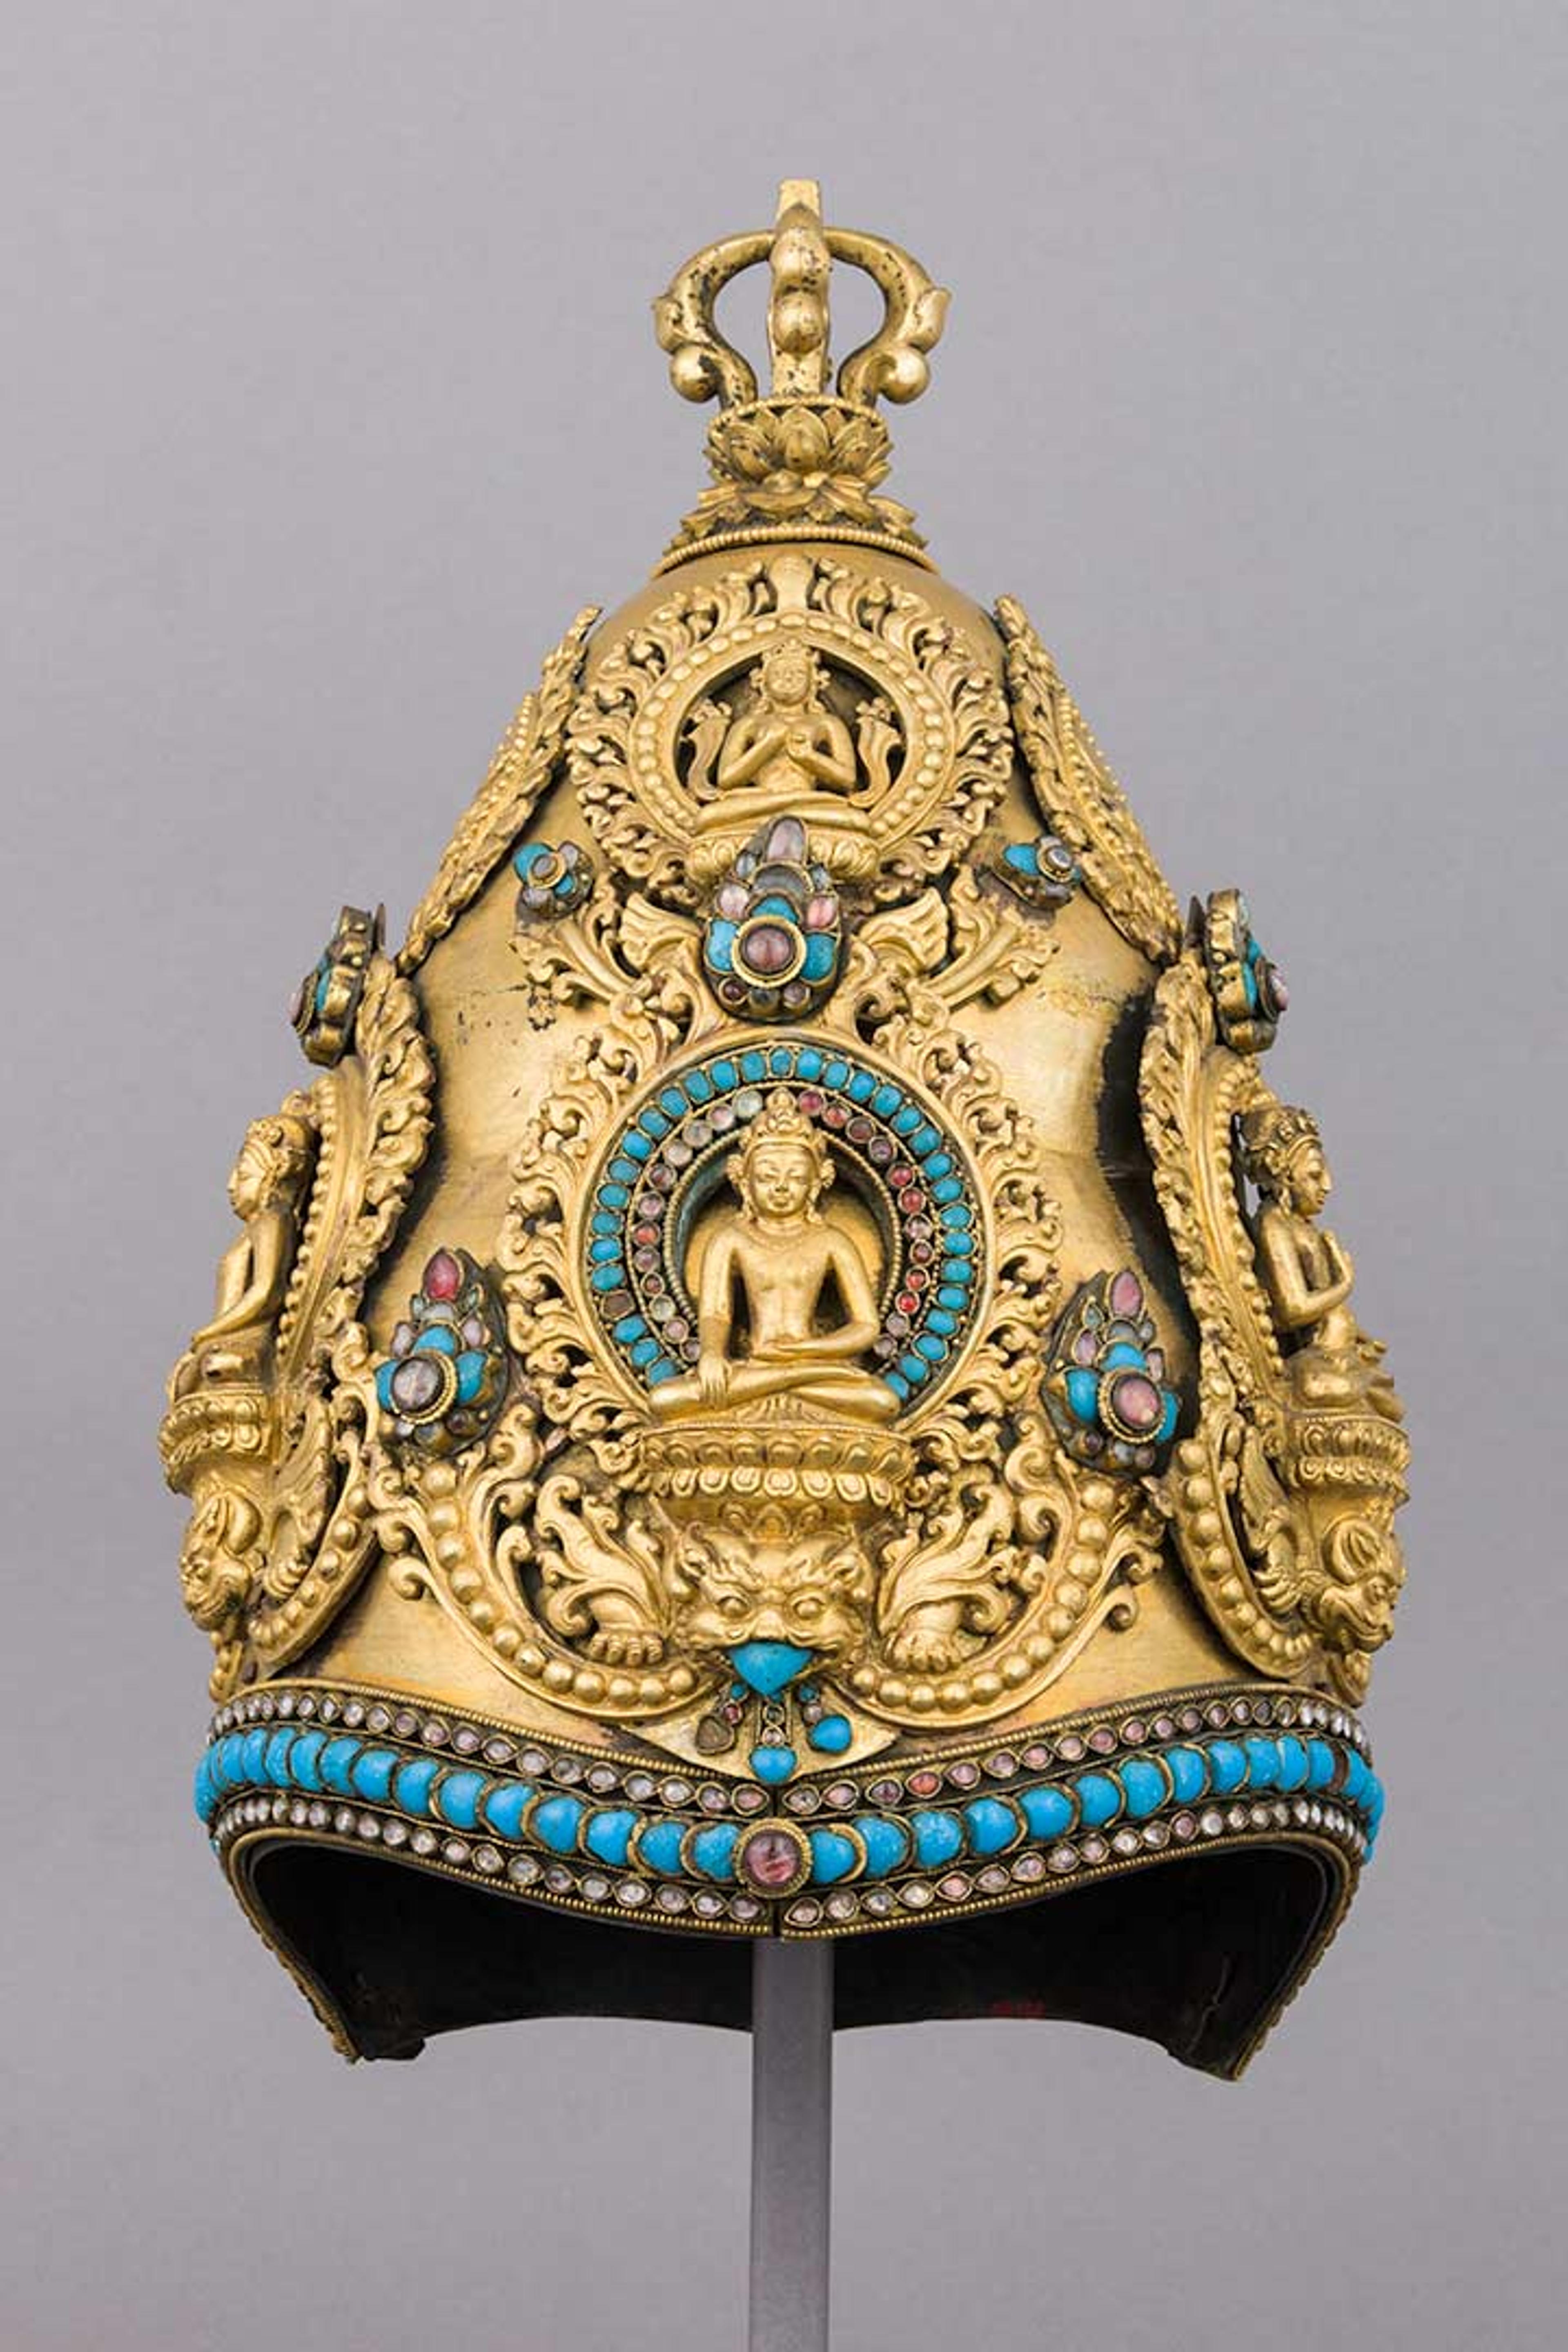 Vajracarya priest's crown with turquoise